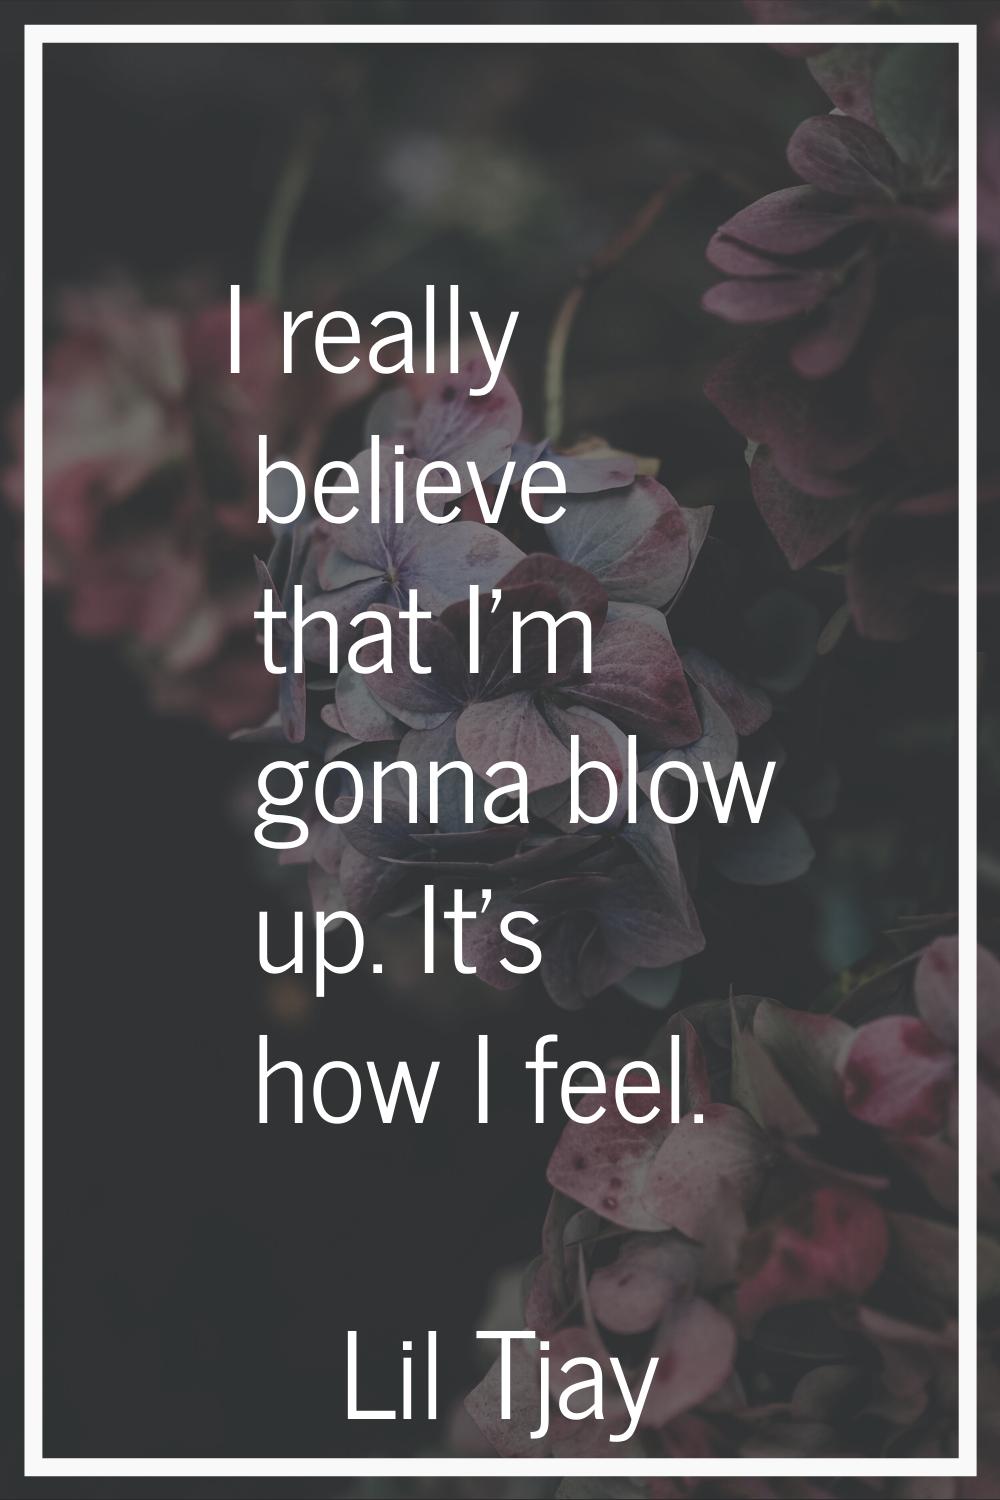 I really believe that I'm gonna blow up. It's how I feel.